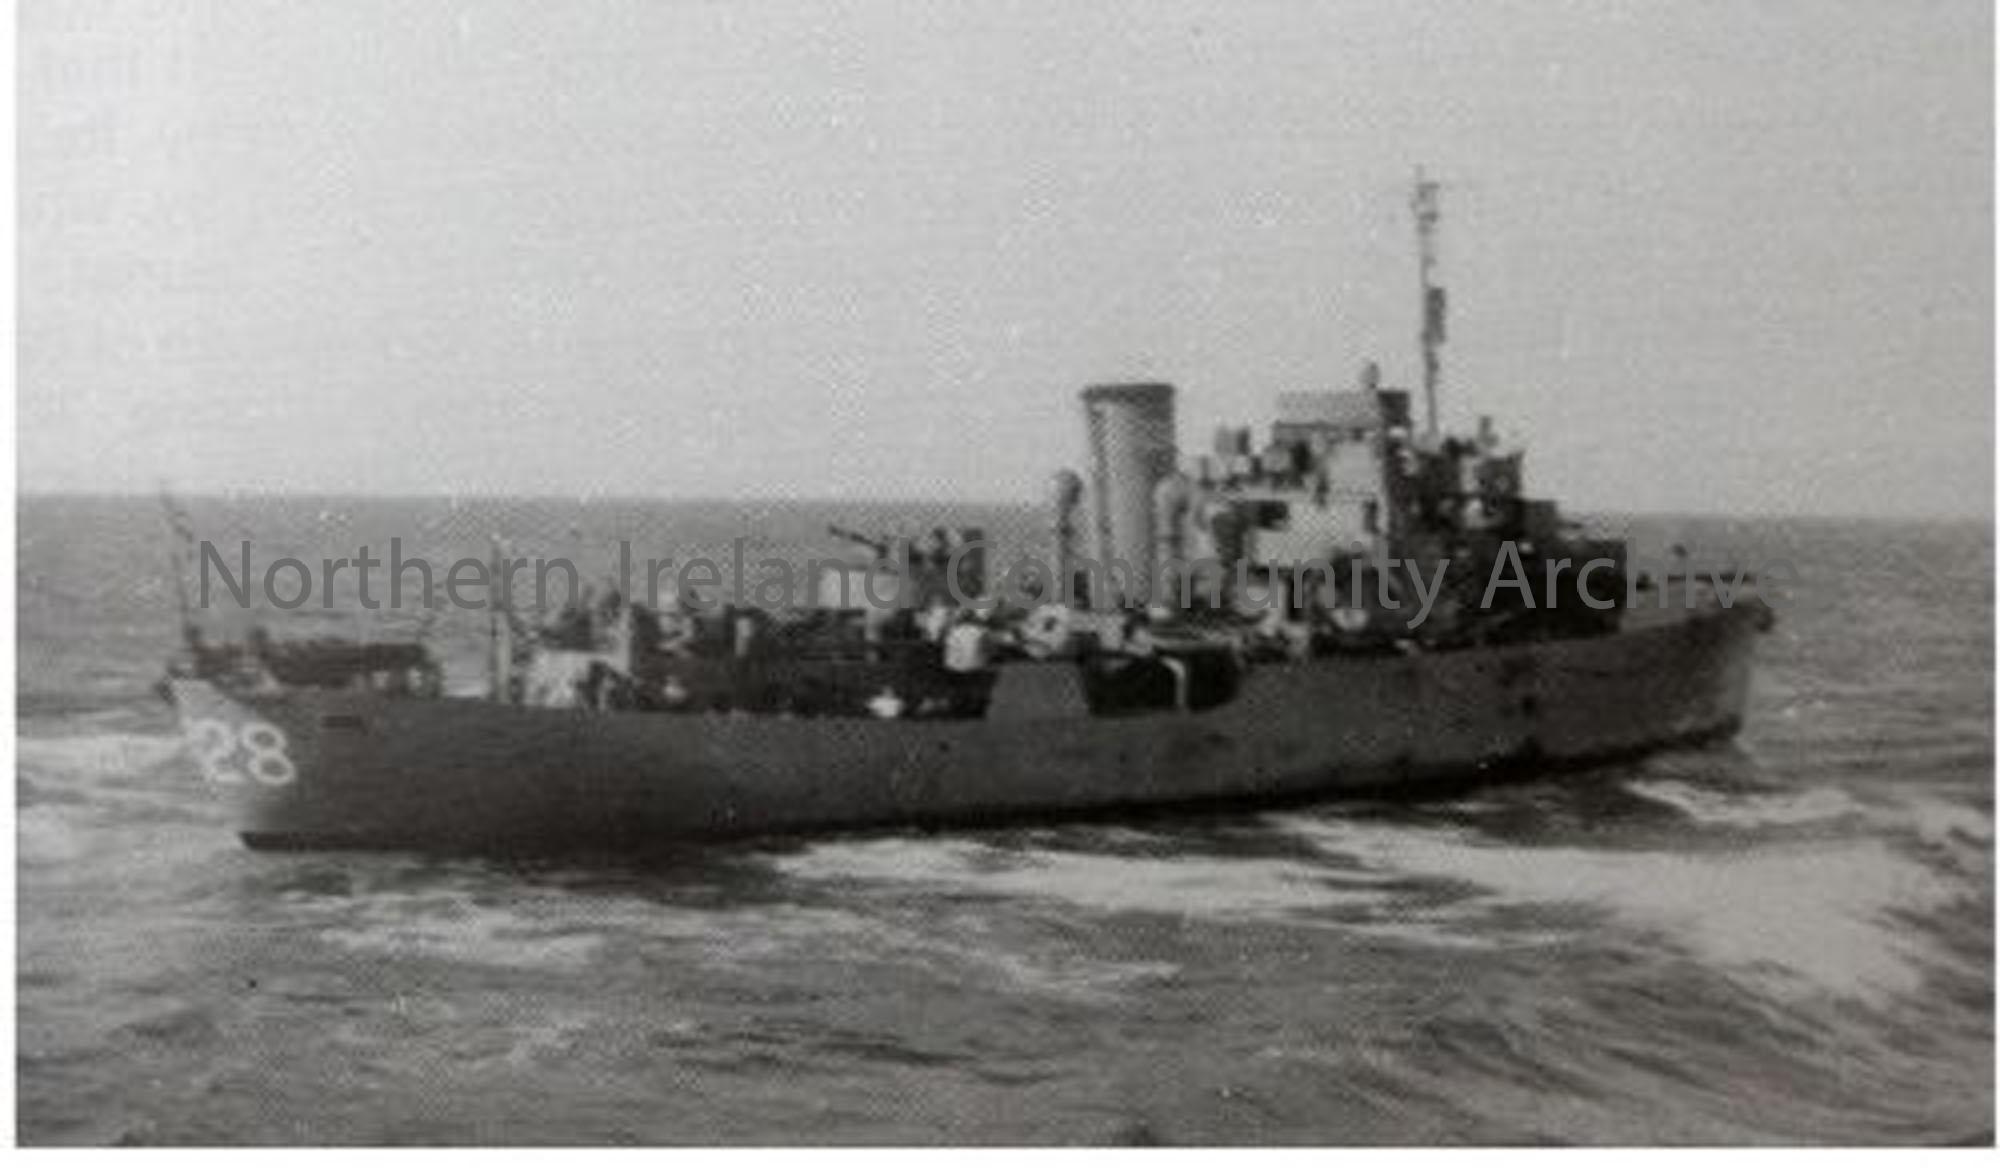 HMS Calendula
K 28  
Ship number 1061
Launched 21 Mar, 1940  
Commissioned 6 May, 1940 
 (4222)